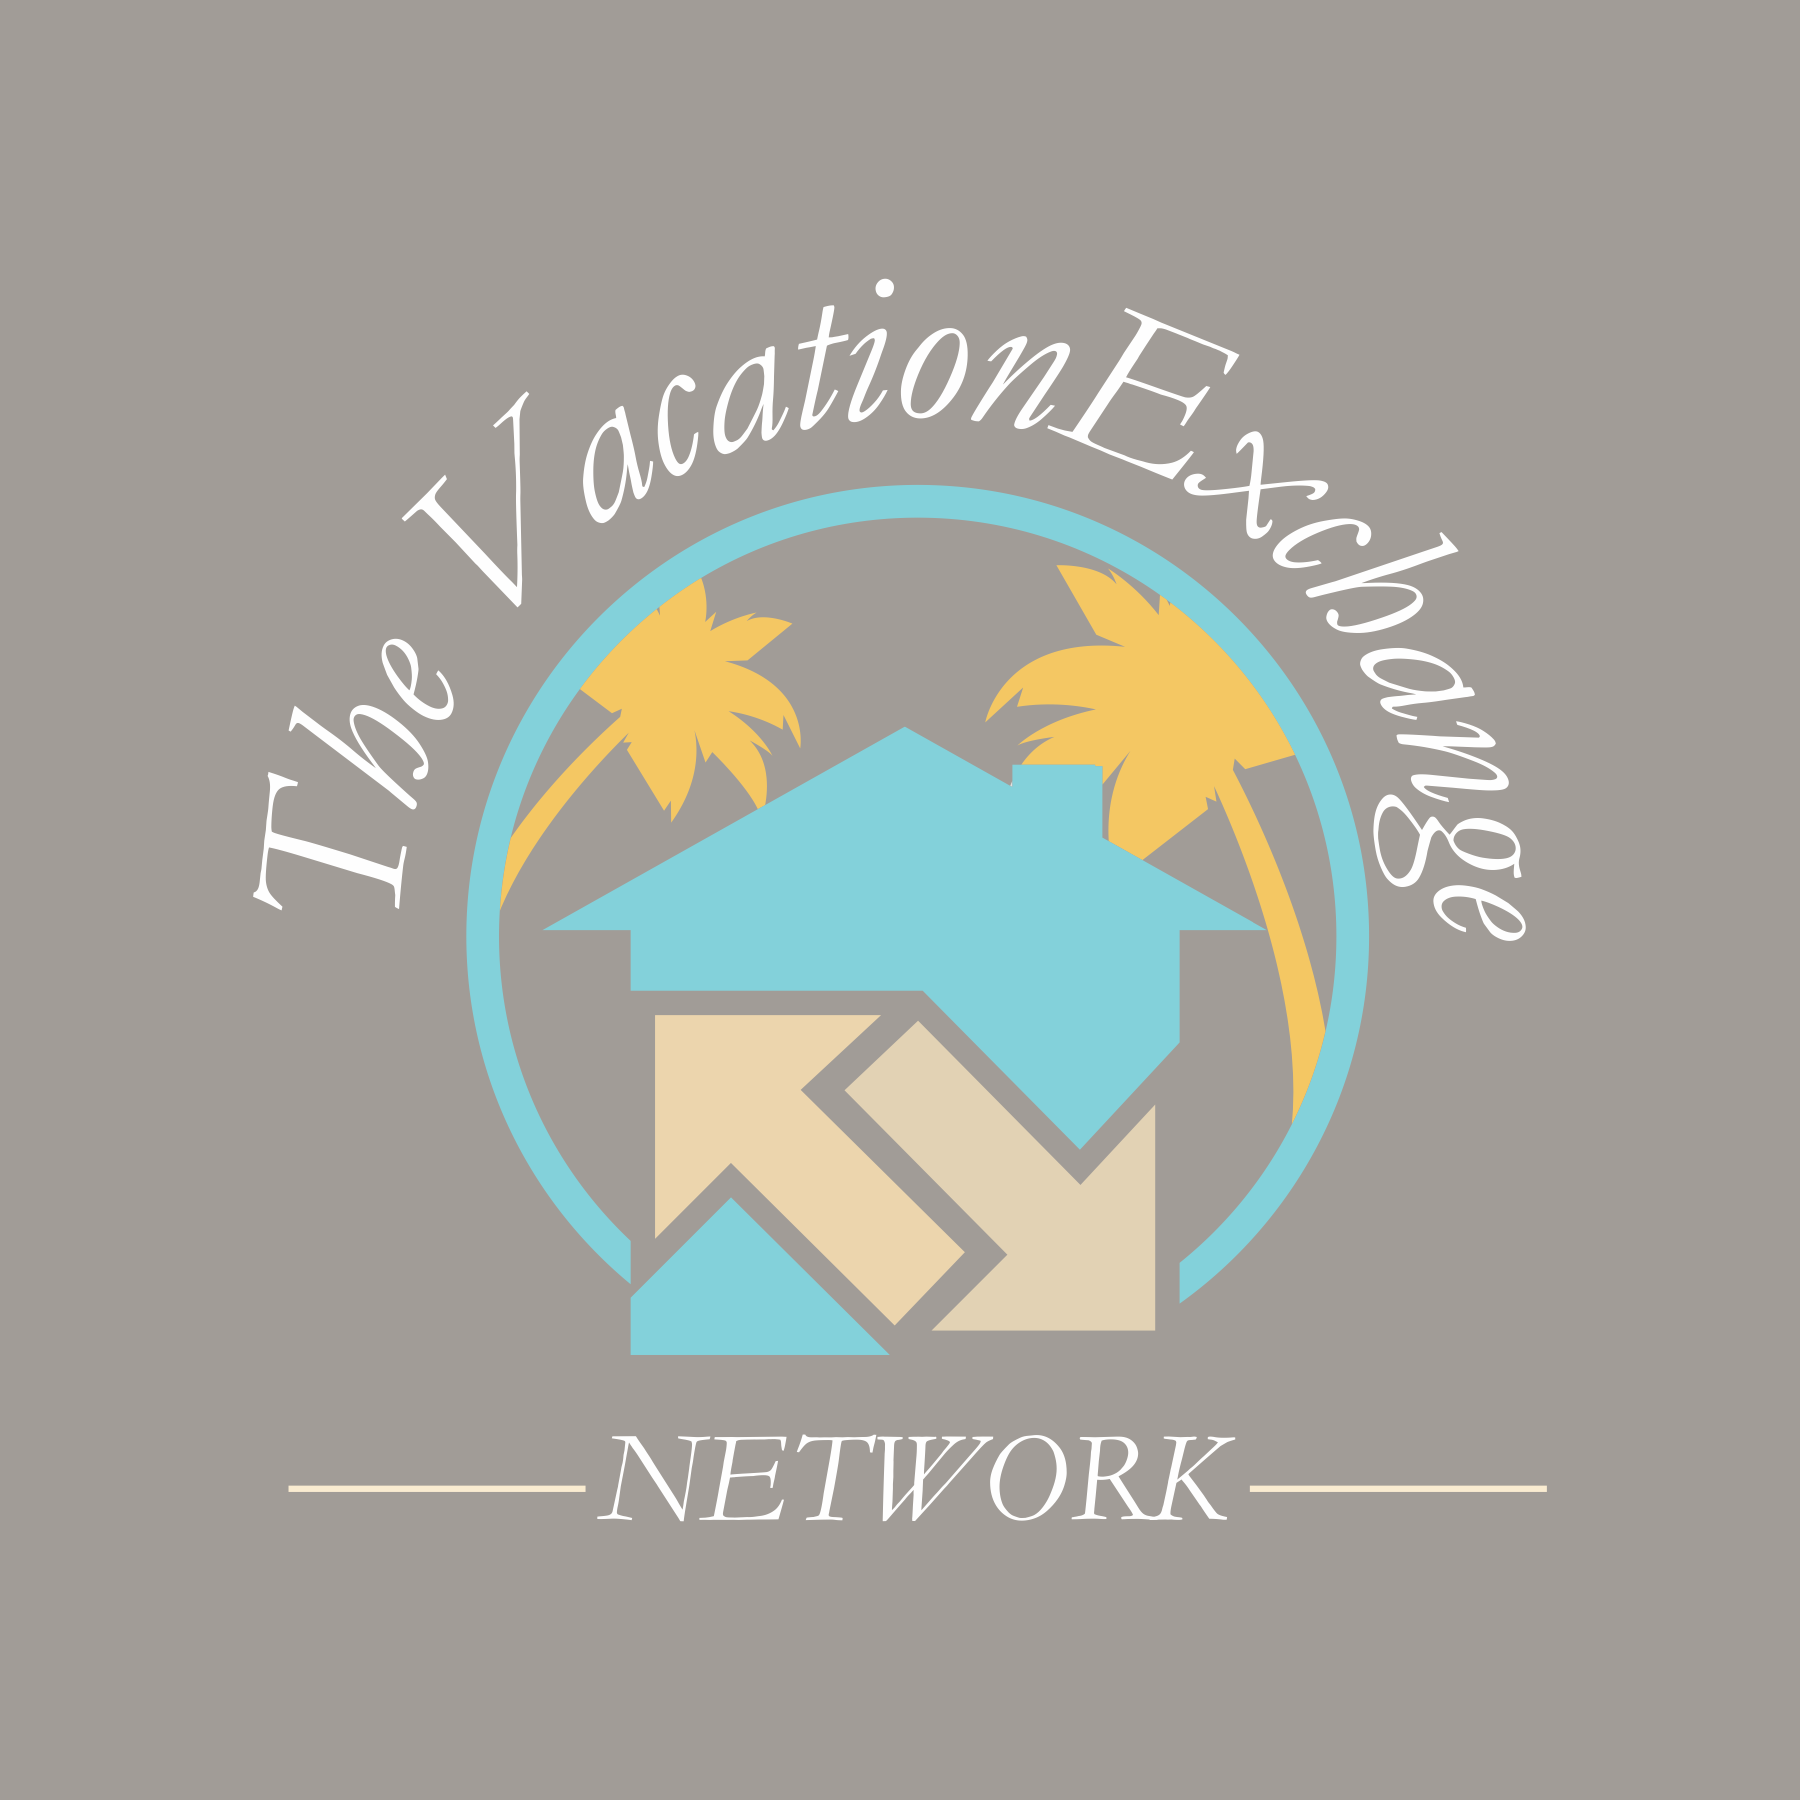 The Vacation Exchange Network